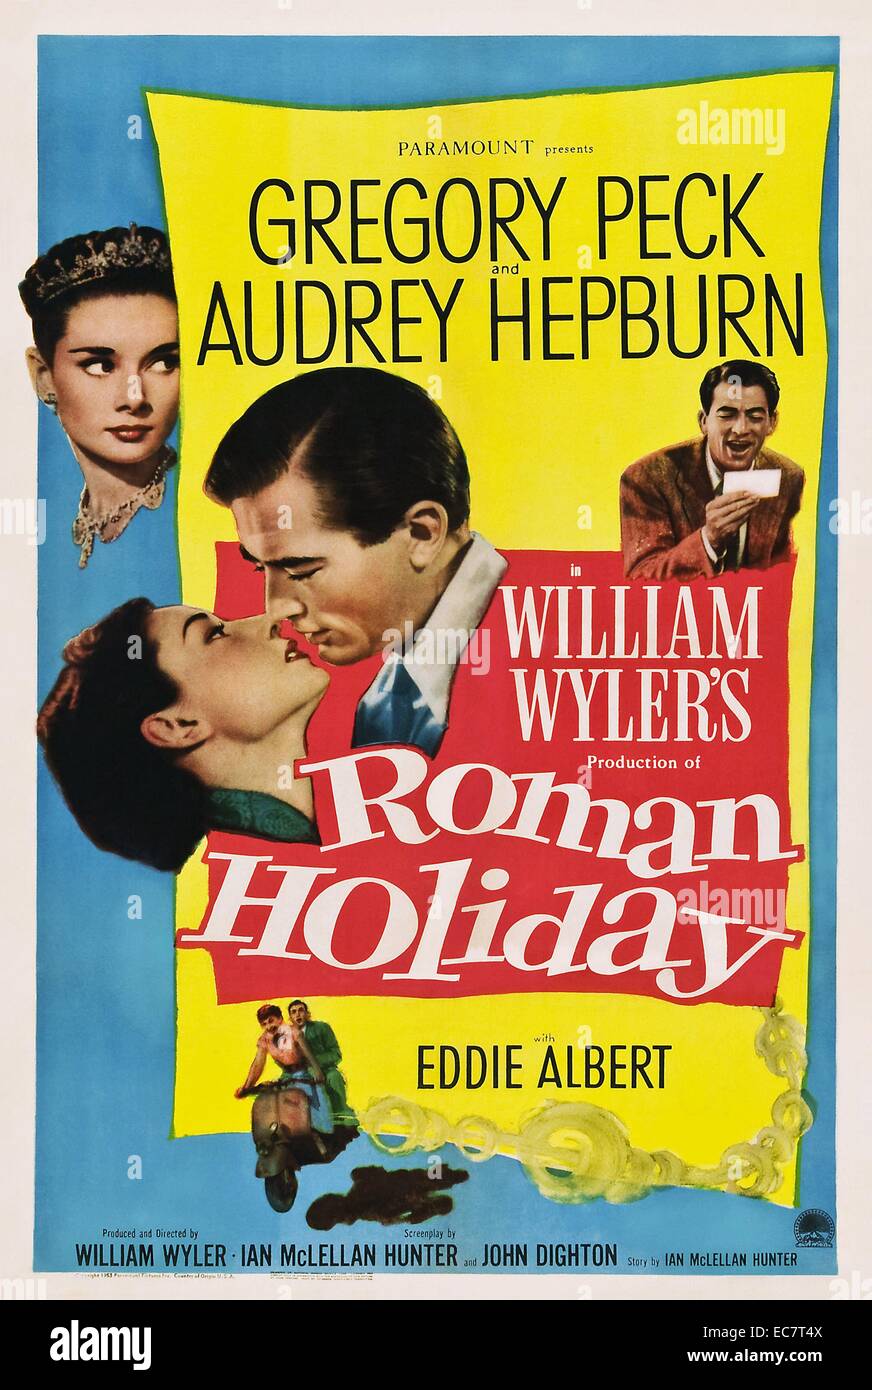 Roman Holiday is a 1953 romantic comedy directed and produced by William Wyler. It stars Gregory Peck as a reporter and Audrey Hepburn as a royal princess out to see Rome on her own. Stock Photo